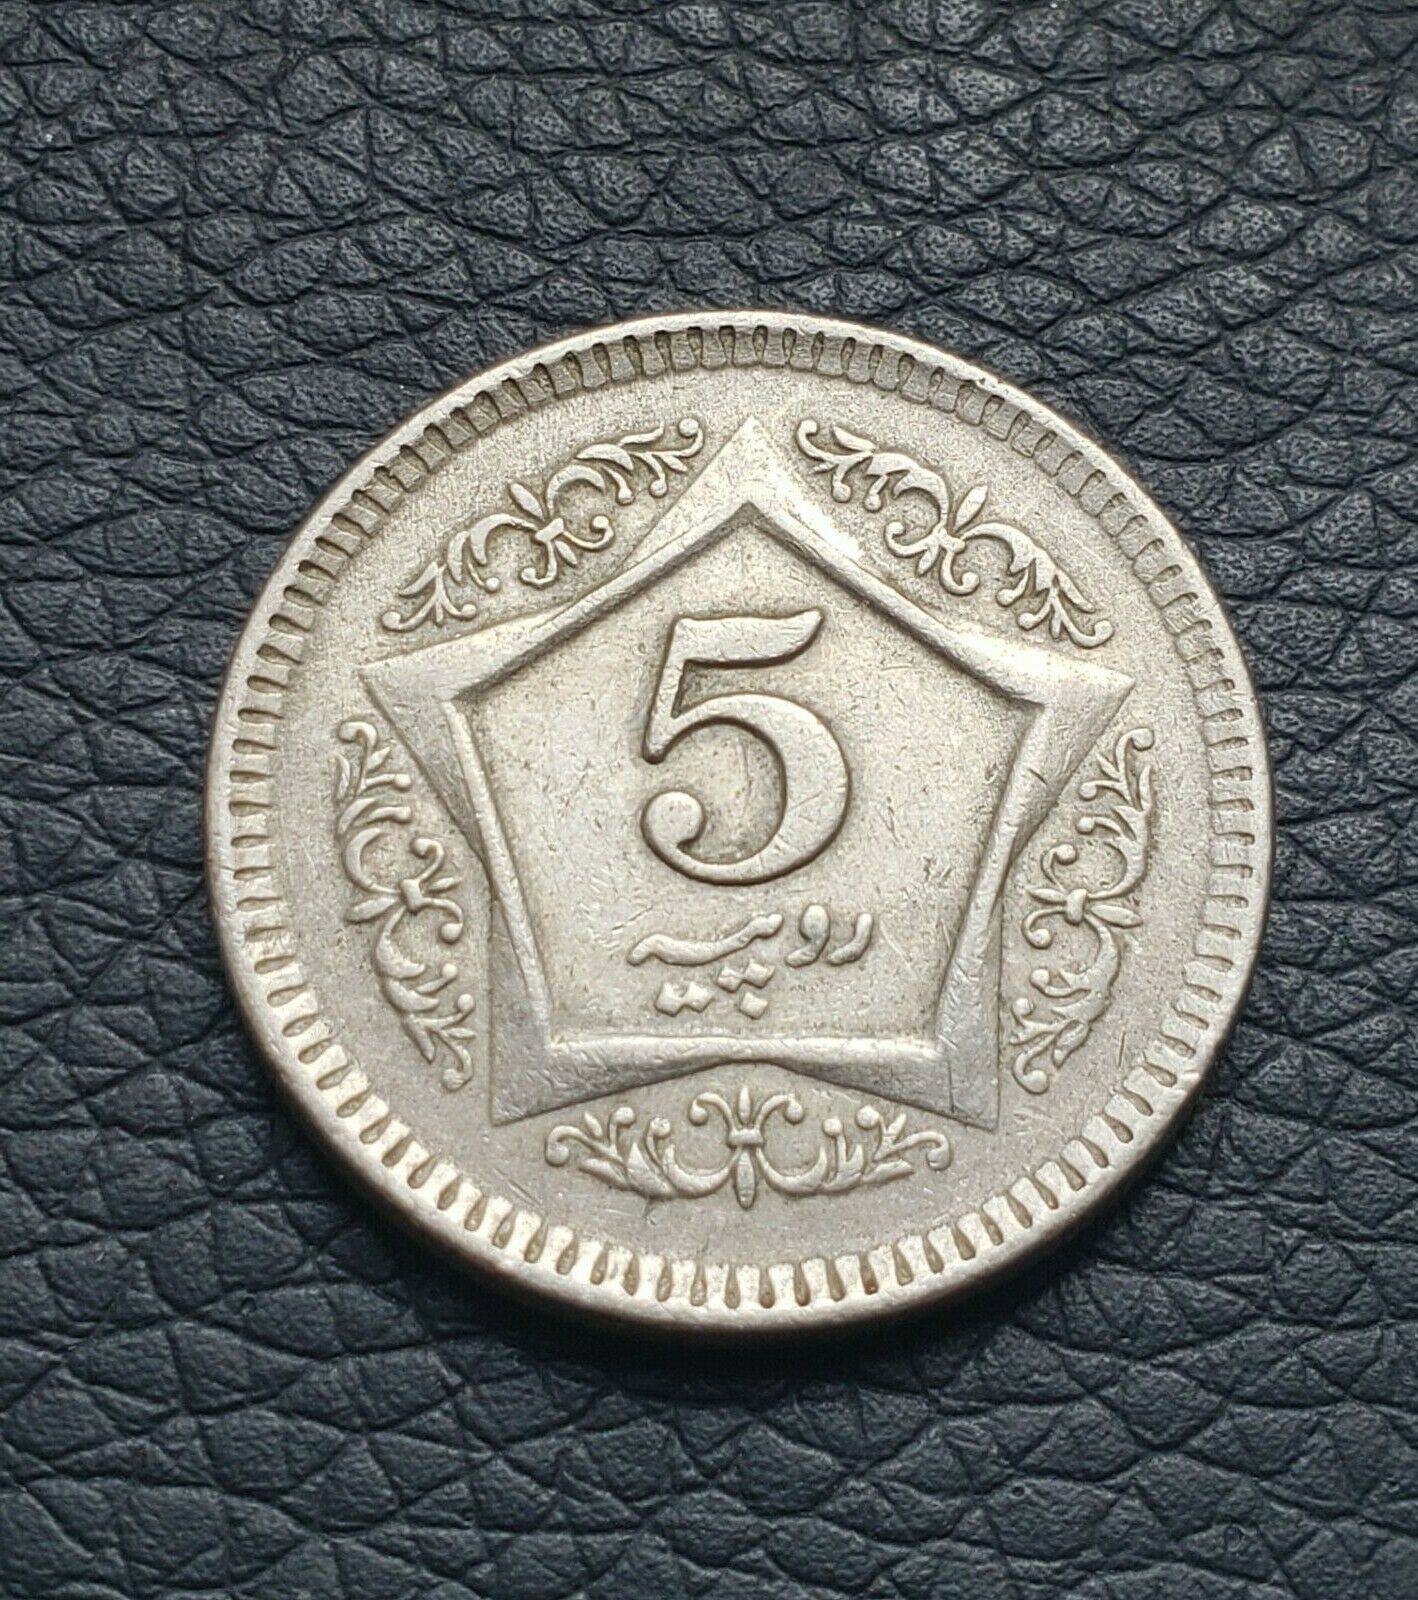 5 Rupees 2004 Pakistan Coin